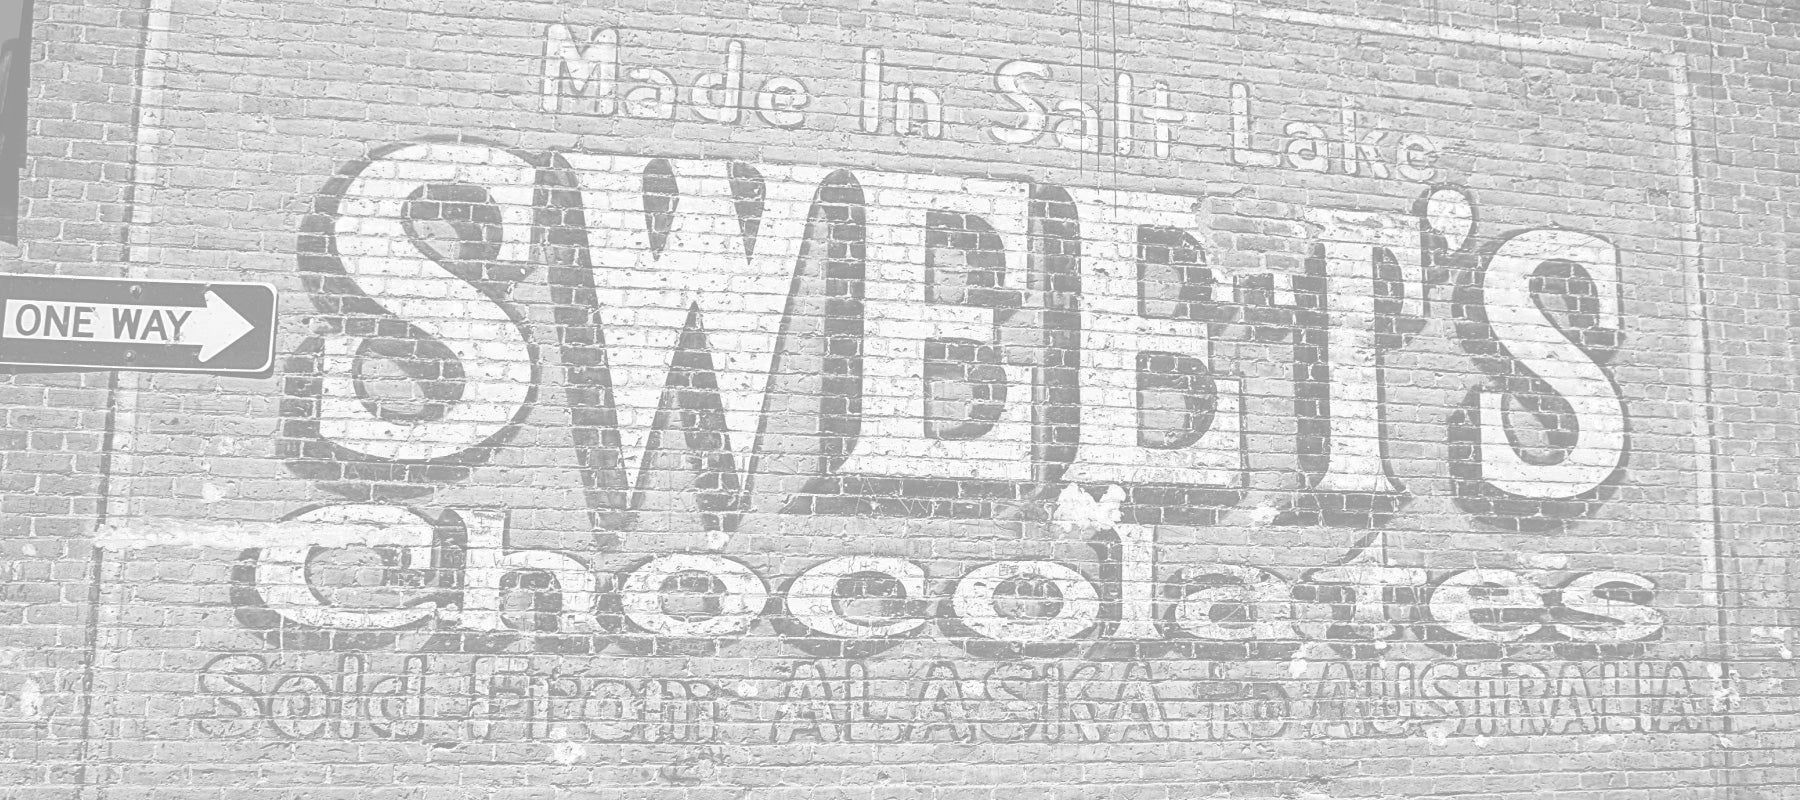 Historical Photo - Sweet's Chocolate On Brick Wall - Contact Us